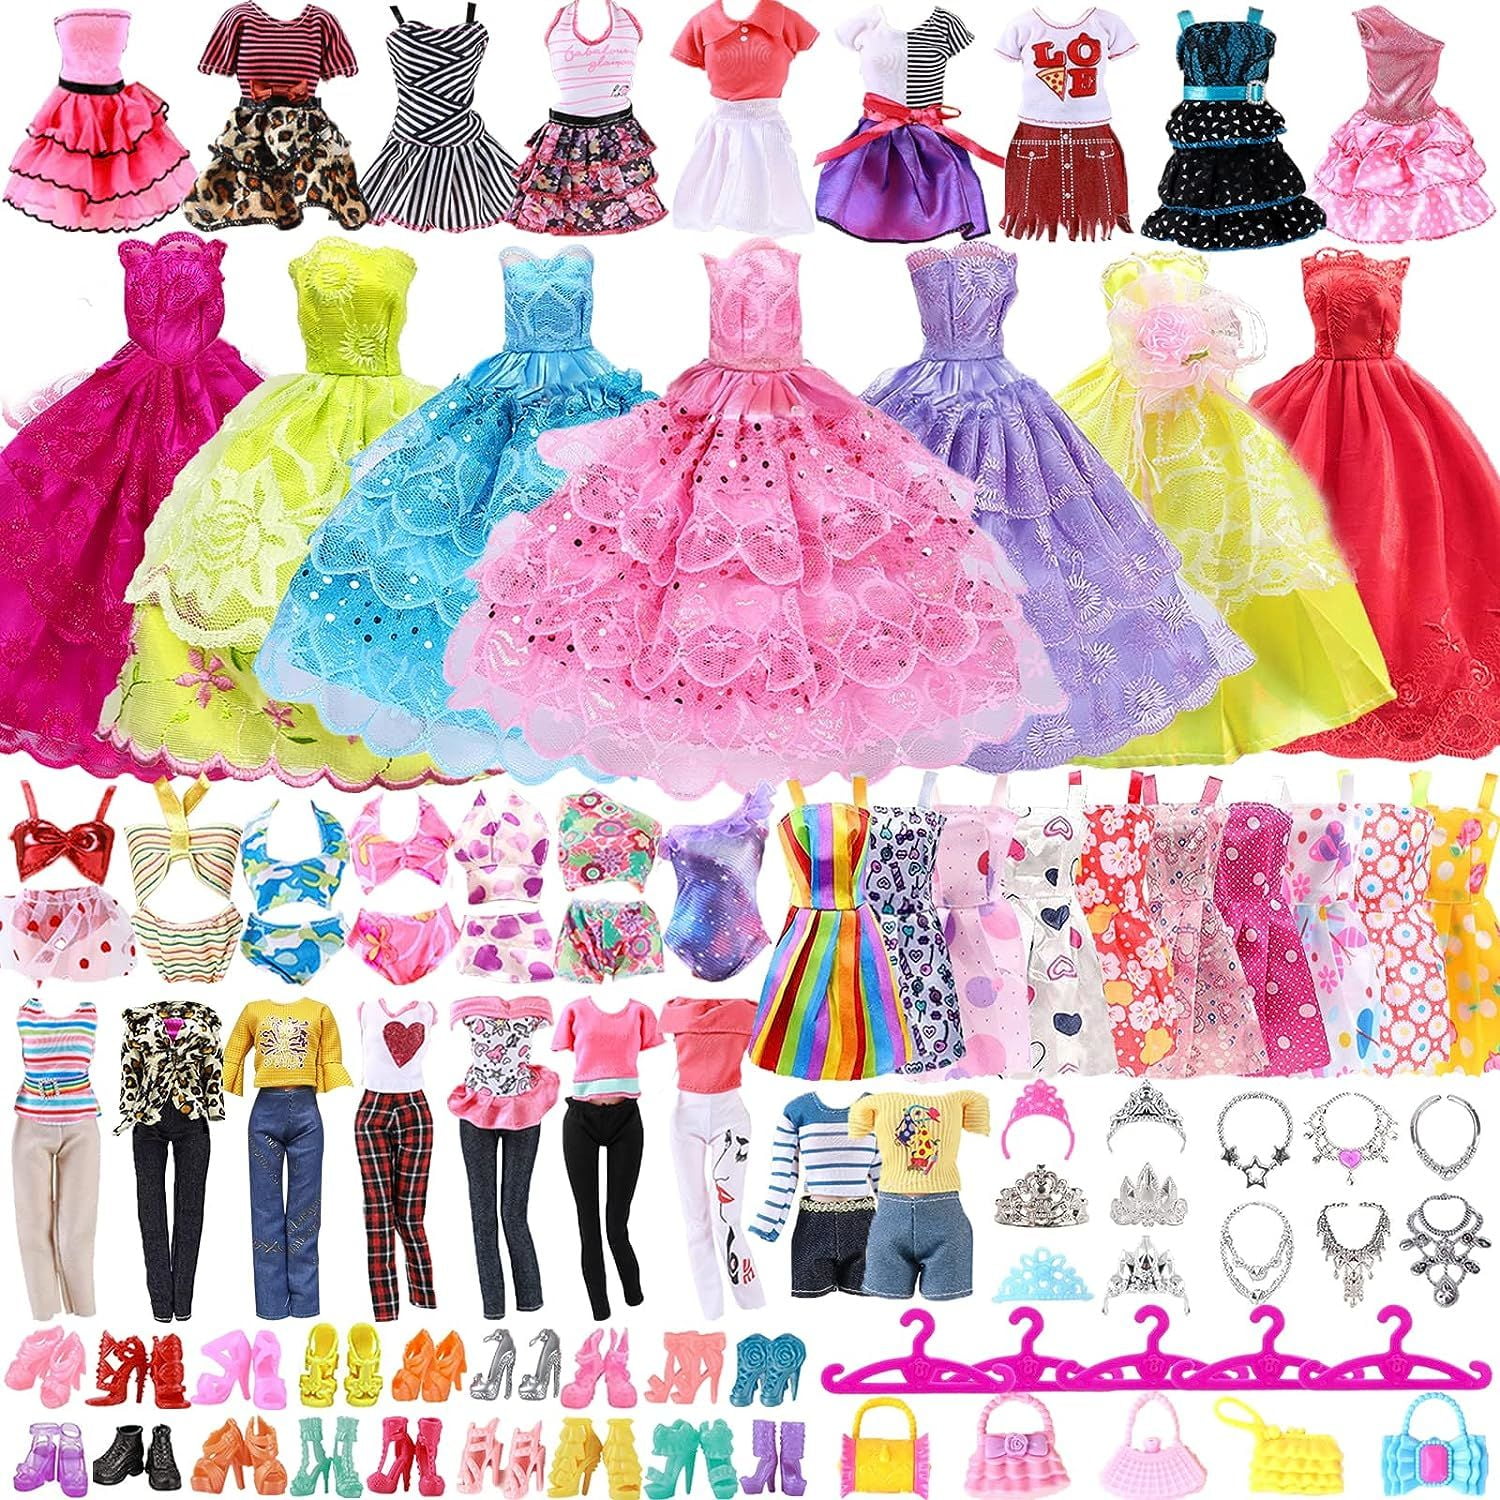 Cfowner 65 PCS Clothes and Accessories for Dolls Including 5 Wedding ...